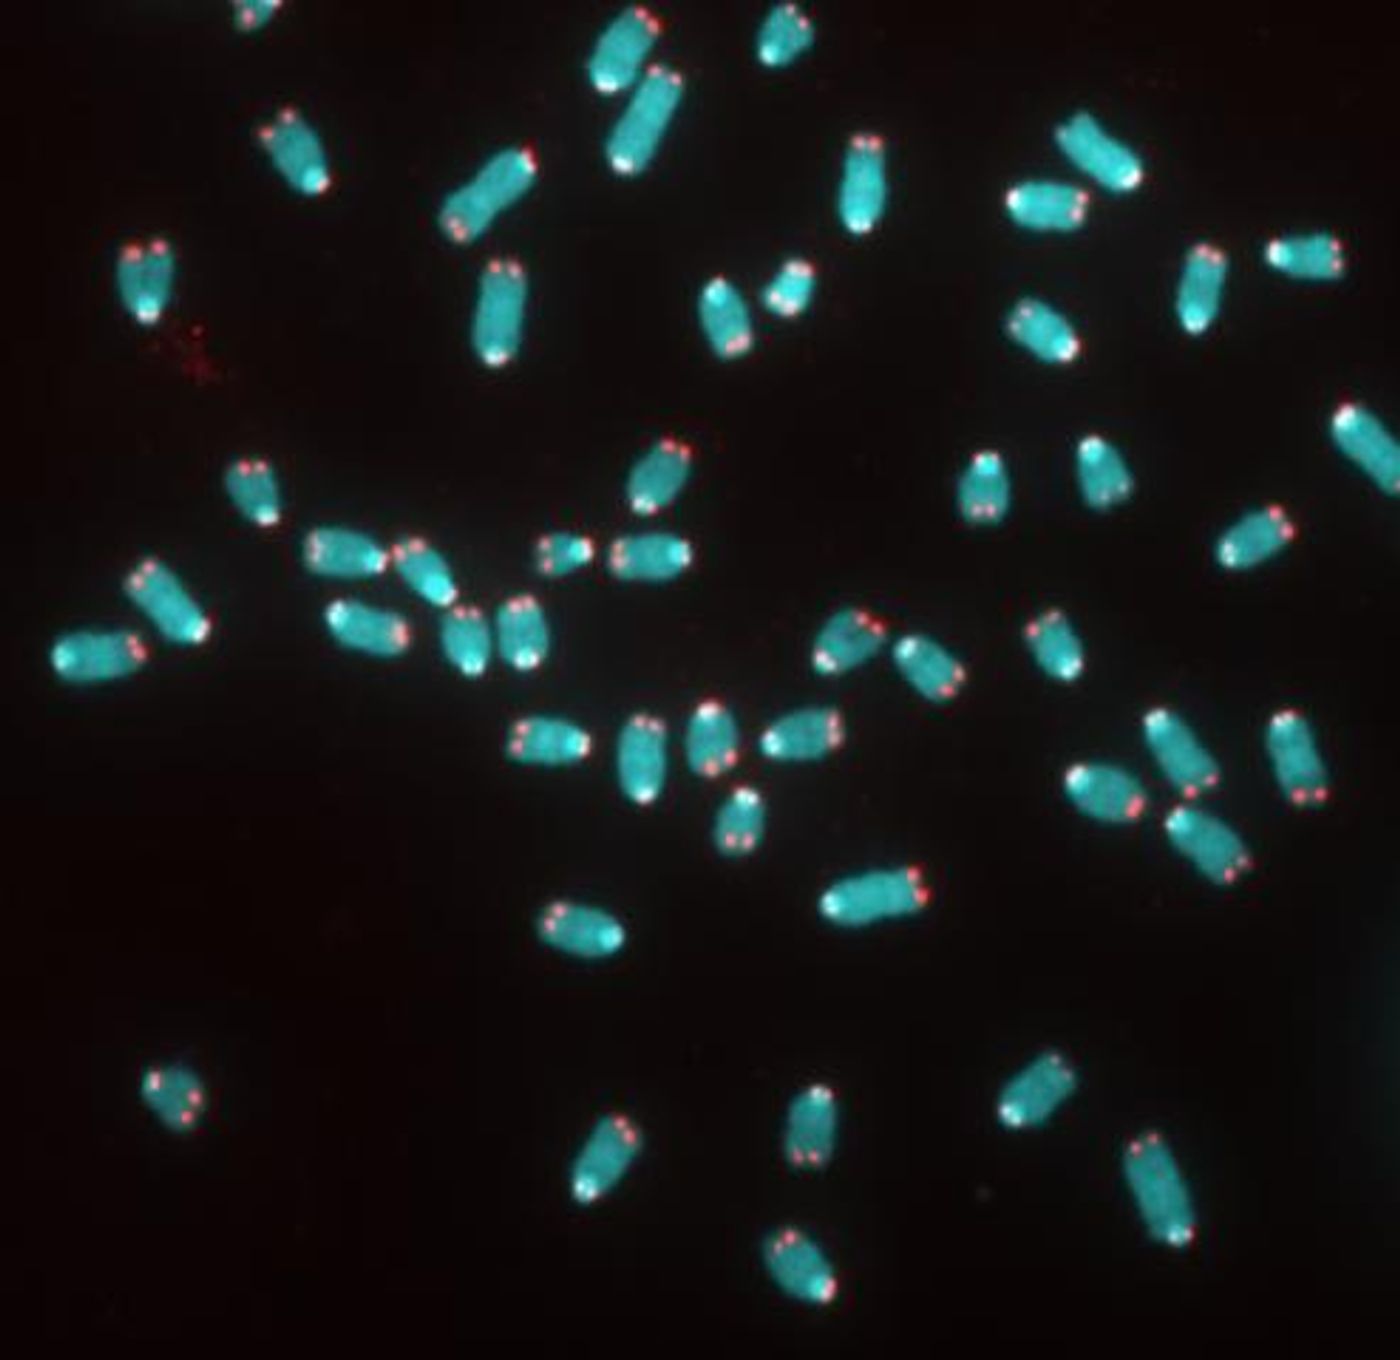 In this image, captured by confocal microscopy, the ends of telomeres can be seen as red dots aligning at opposite sides of blue chromosomes in skin cells that are preparing to divide. / Credit: Kan Cao, University of Maryland